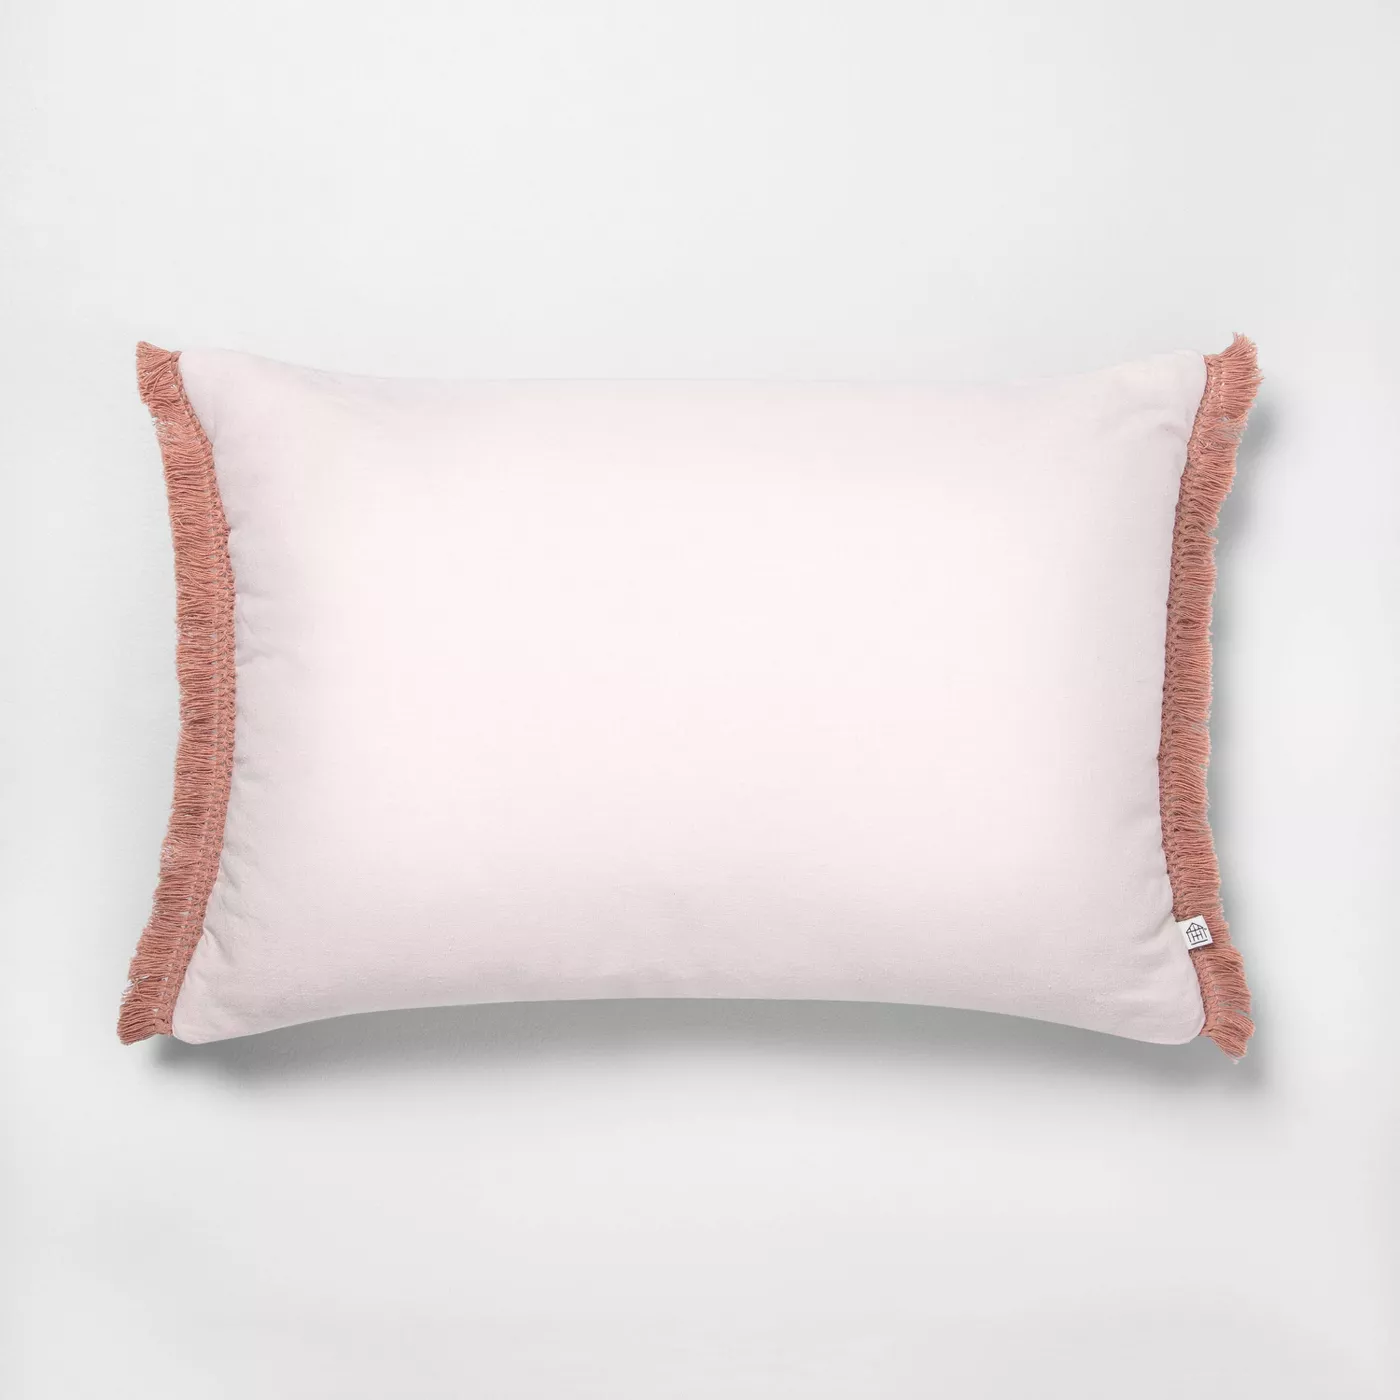 Fringe Throw Pillow Dusty Pink - Hearth & Hand™ with Magnolia - image 1 of 4